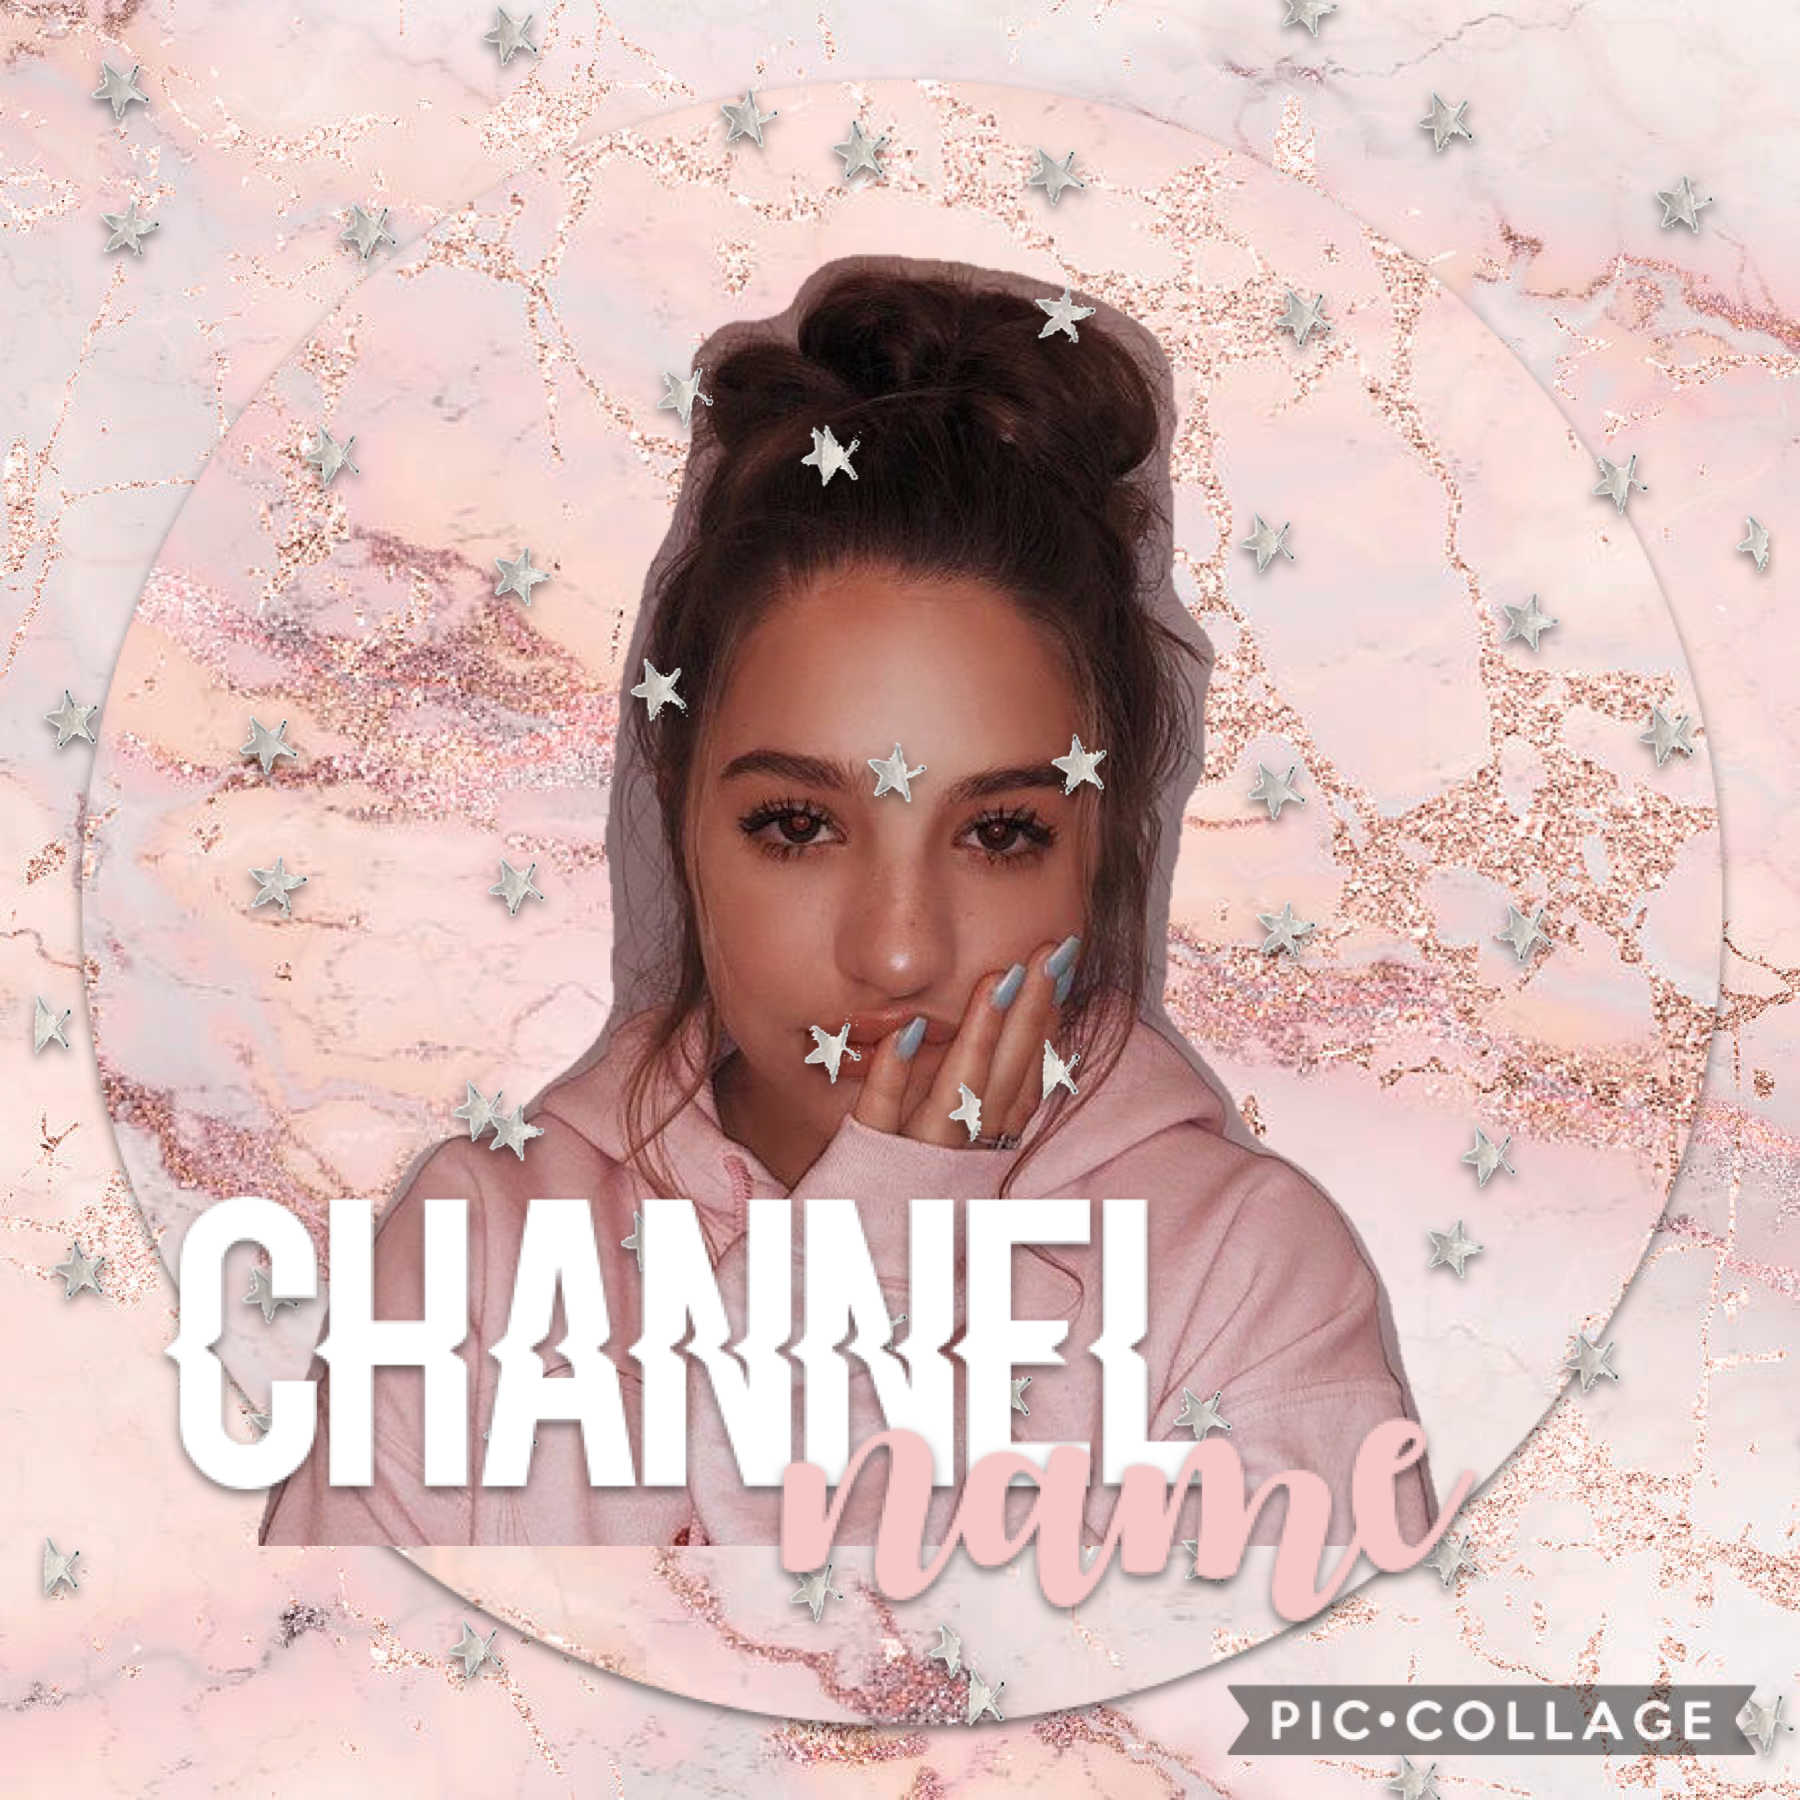 just a lil’ pfp for anyone who wants it ;)